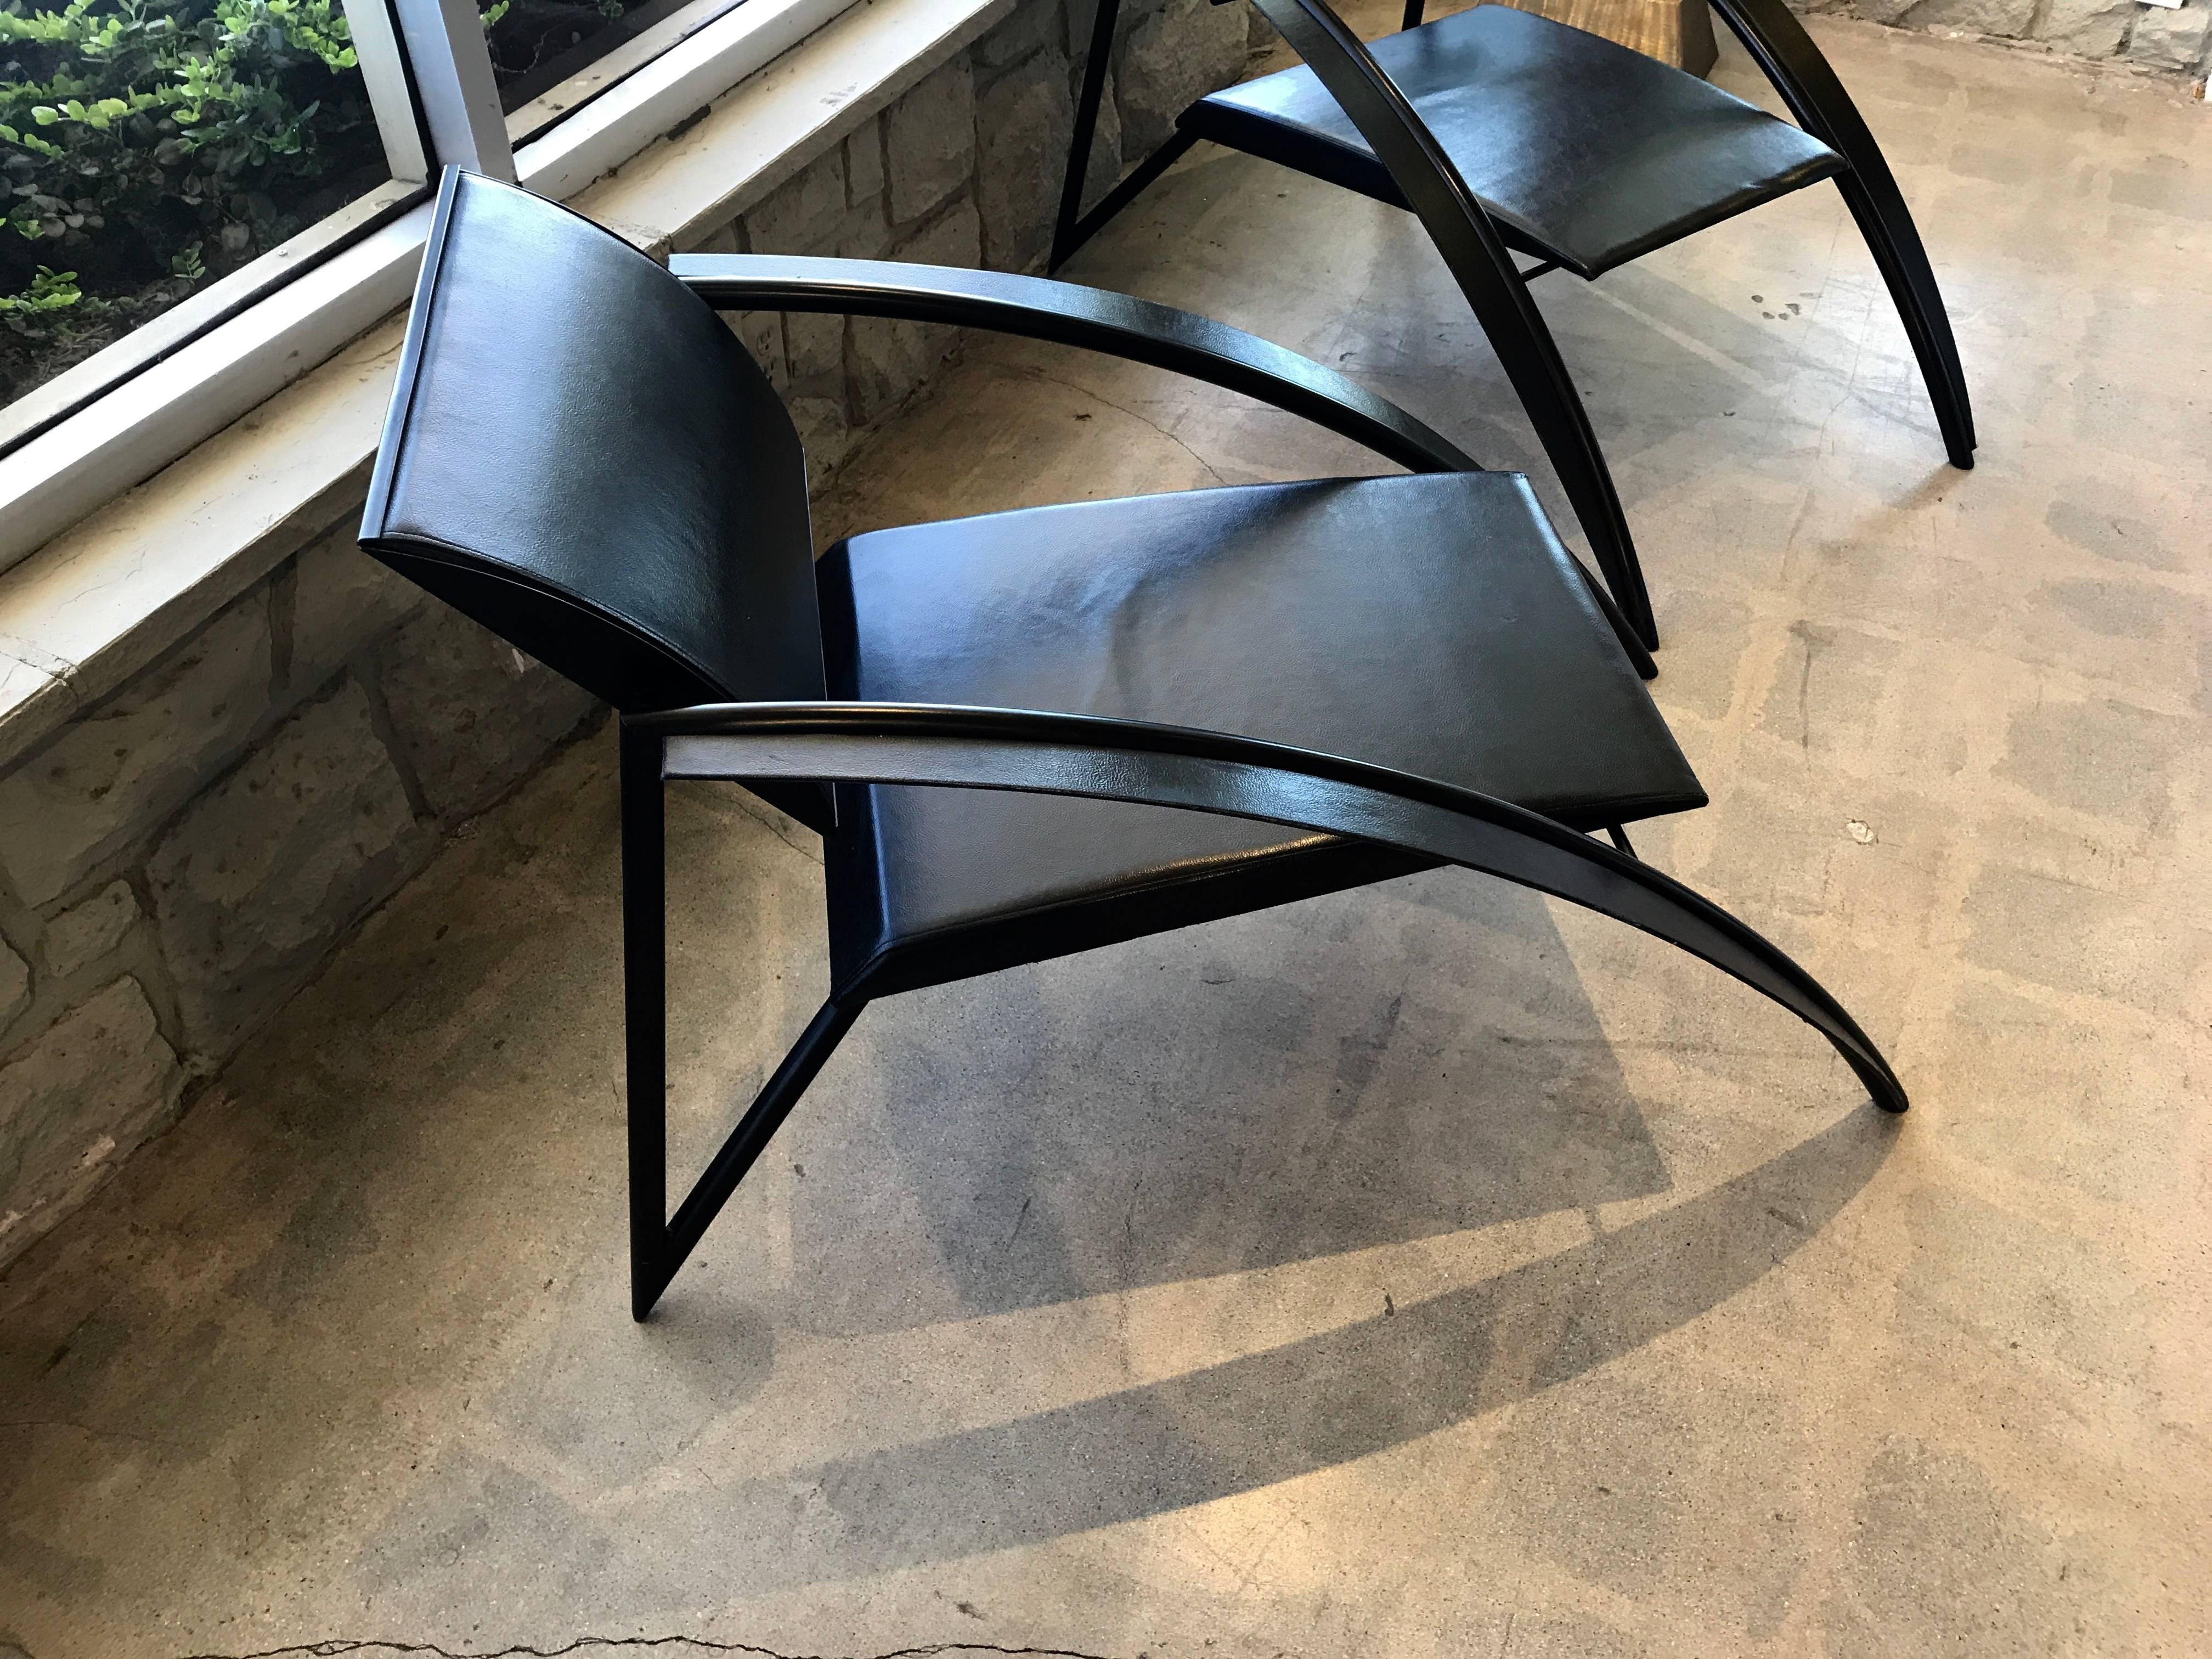 This is a pair of rare stunning vintage armchair designed by the French Architect Jean Louis Godivier. They were created in 1980s and a version of this chair was exhibited in a modern furniture expo at the Pompidou centre in 1986. A handsome